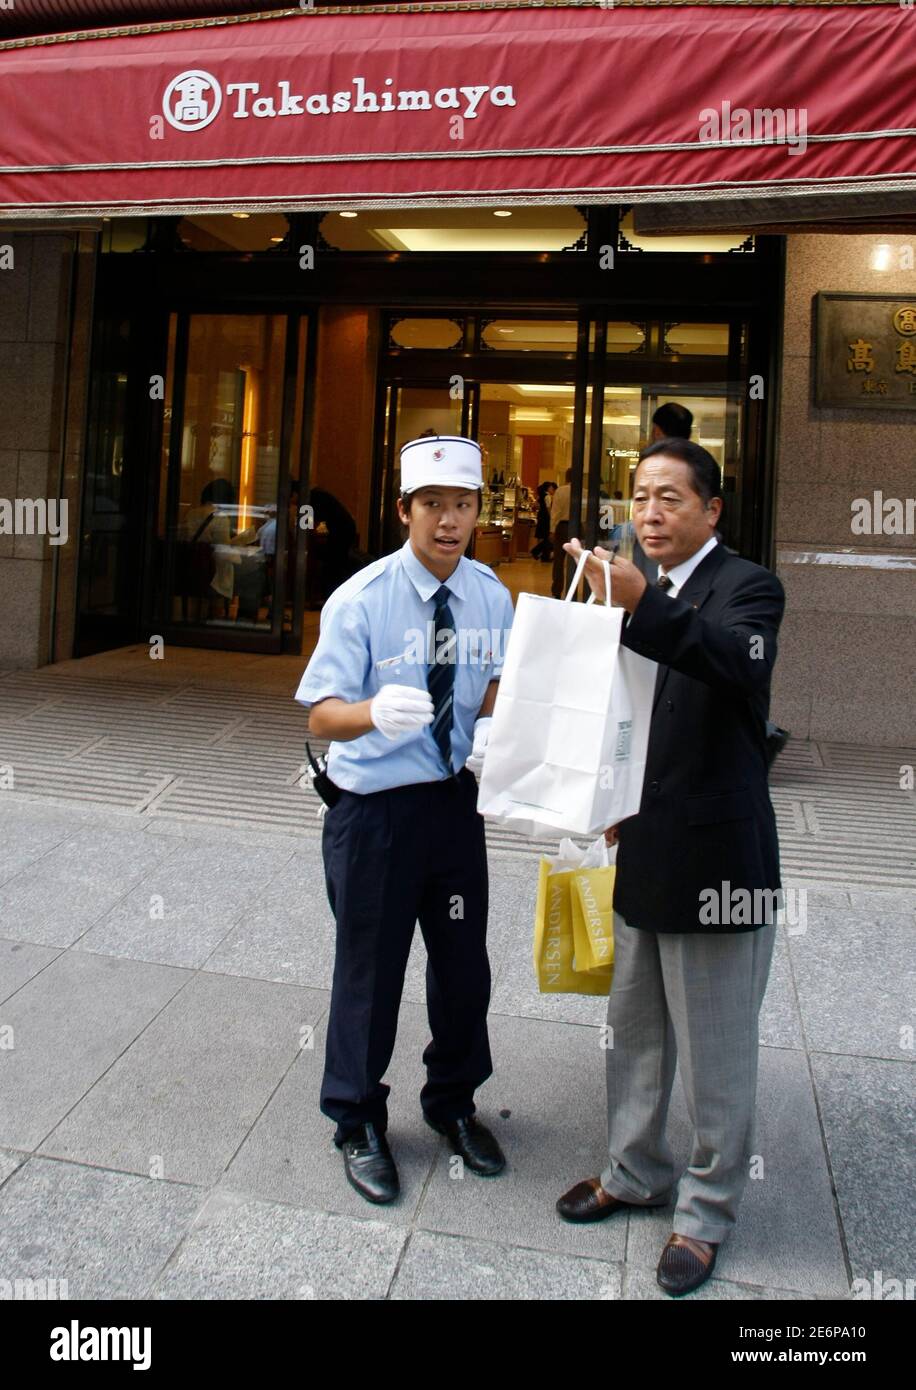 An employee of Takashimaya department store (L) attends to a customer in Tokyo September 3, 2007. Japanese department store retailer Takashimaya Co Ltd is unlikely to engage in mergers and acquisitions in the current market climate, company president Koji Suzuki told Reuters in an interview on Monday.    REUTERS/Kim Kyung-Hoon (JAPAN) Stock Photo